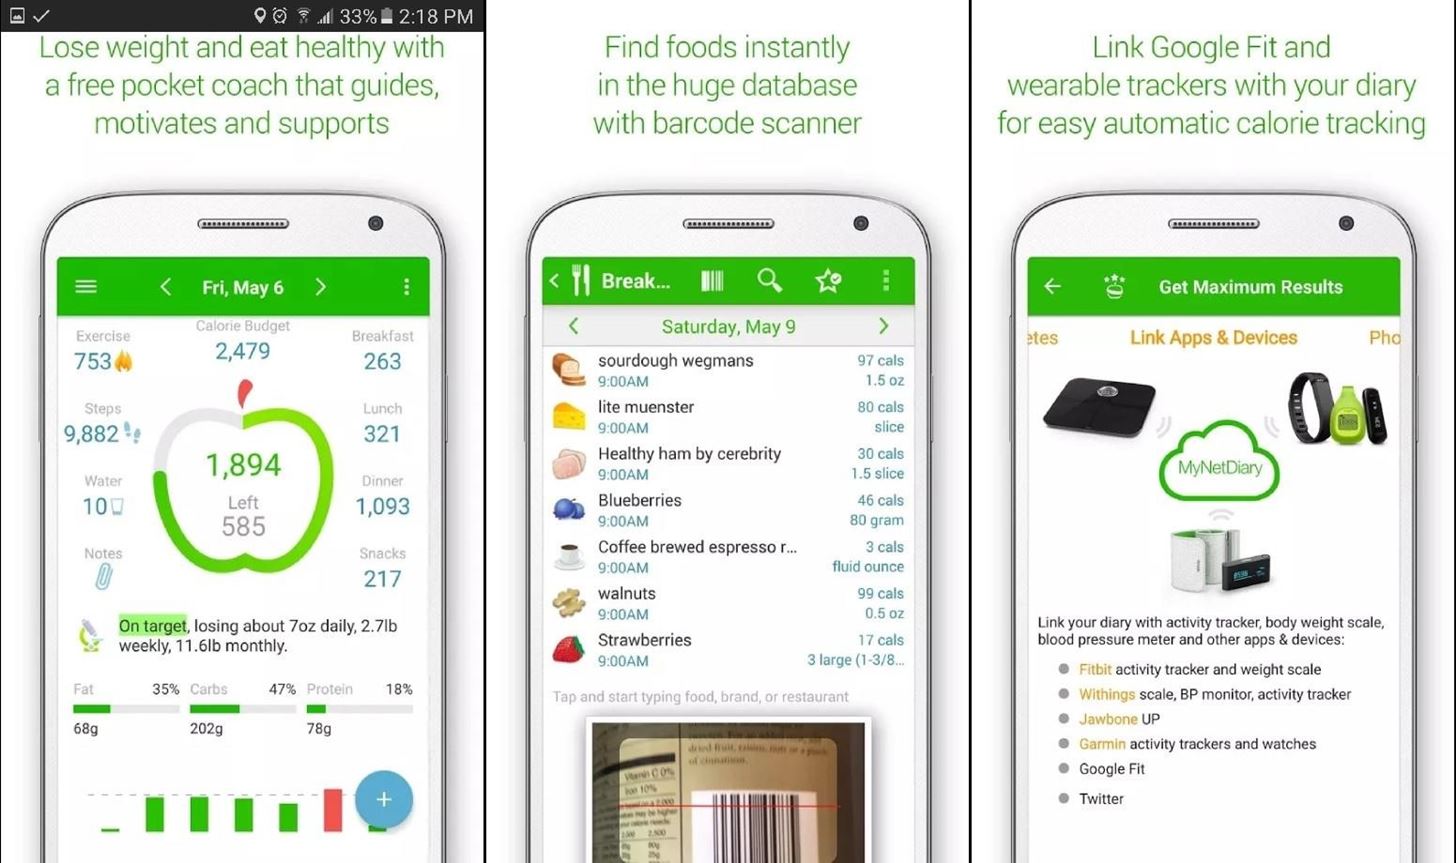 6 Apps to Help You Diet & Exercise More in the New Year